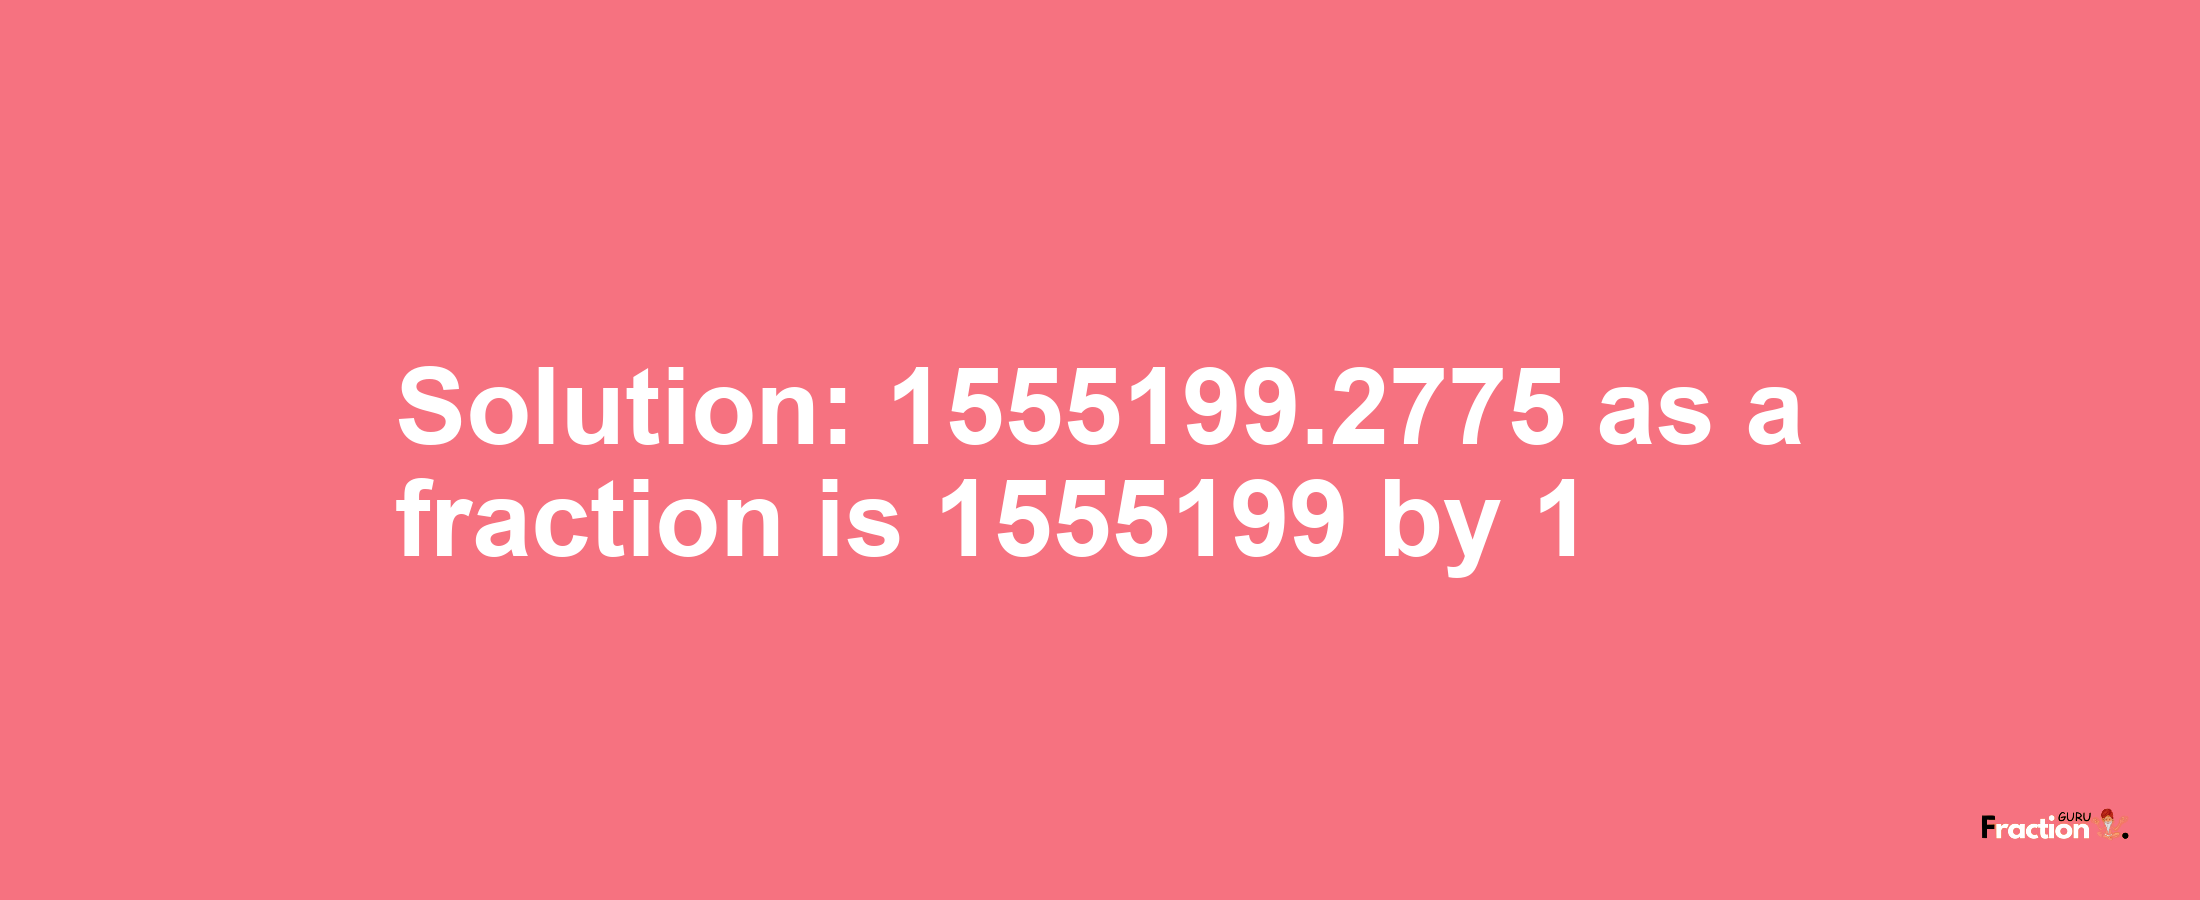 Solution:1555199.2775 as a fraction is 1555199/1